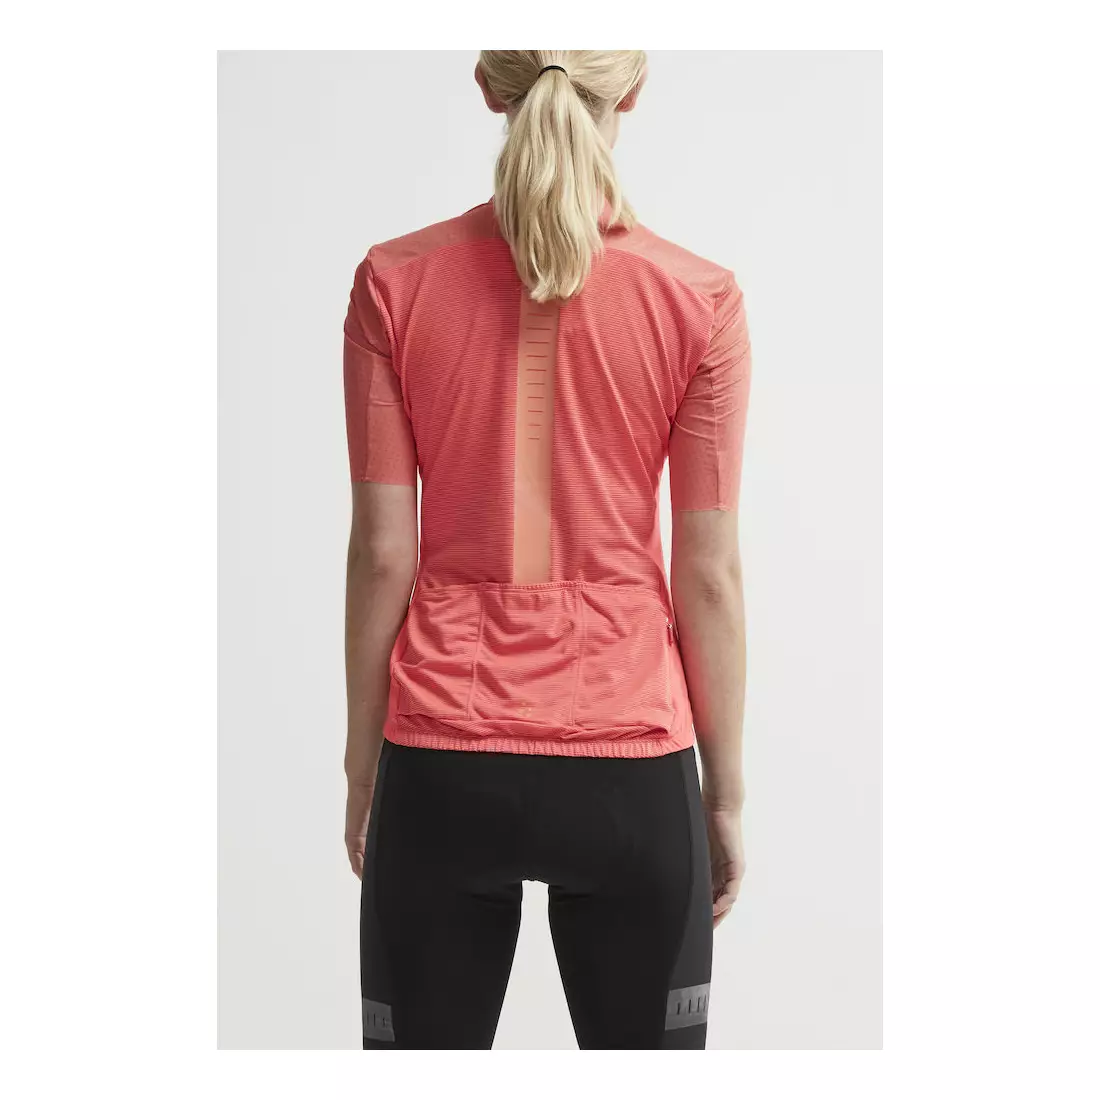 CRAFT HALE GLOW women's bicycle jersey 1907125-734410